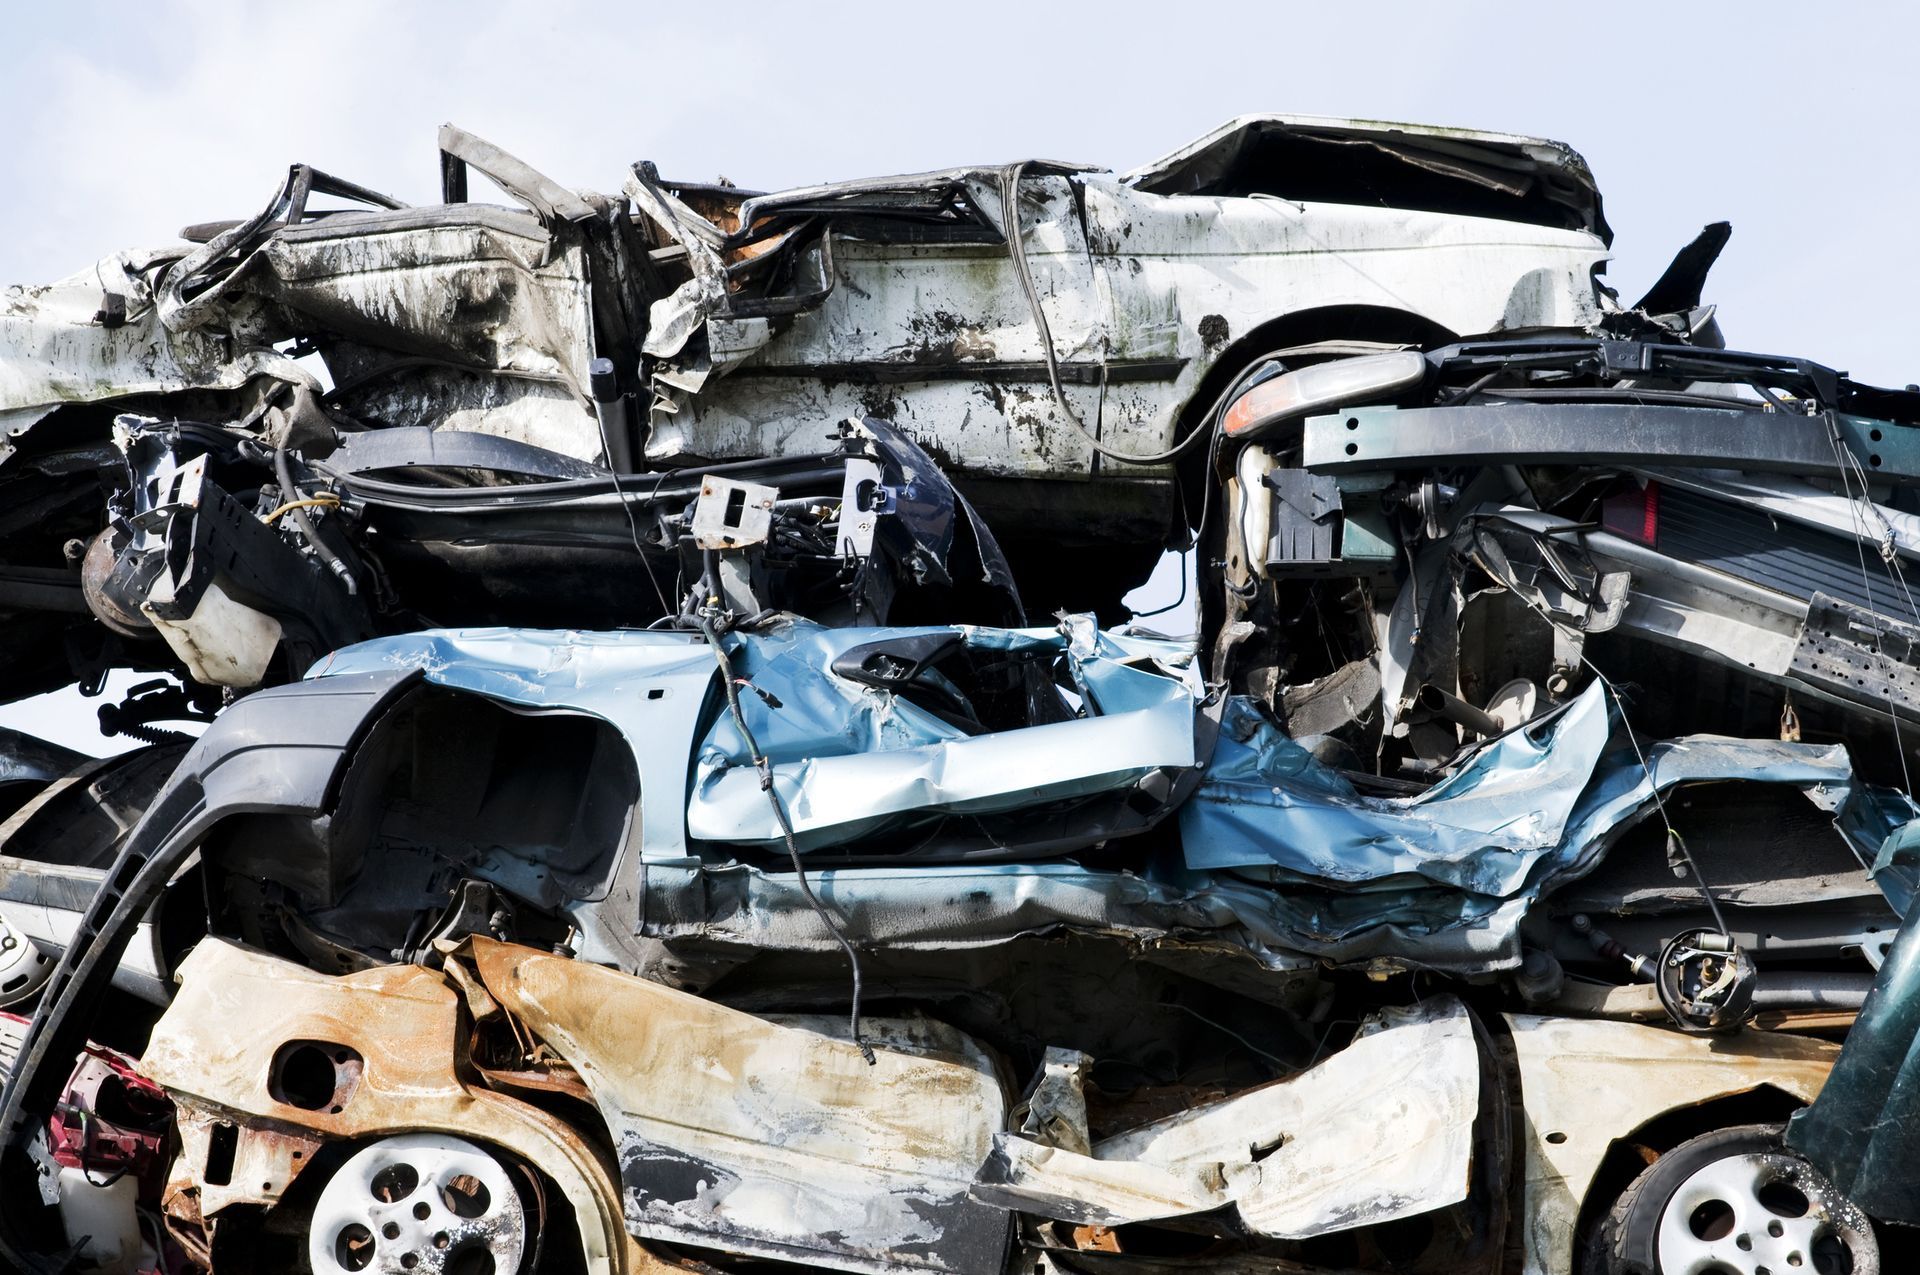 Cash for Cars Junk Car Removal Near Chicago Illinois